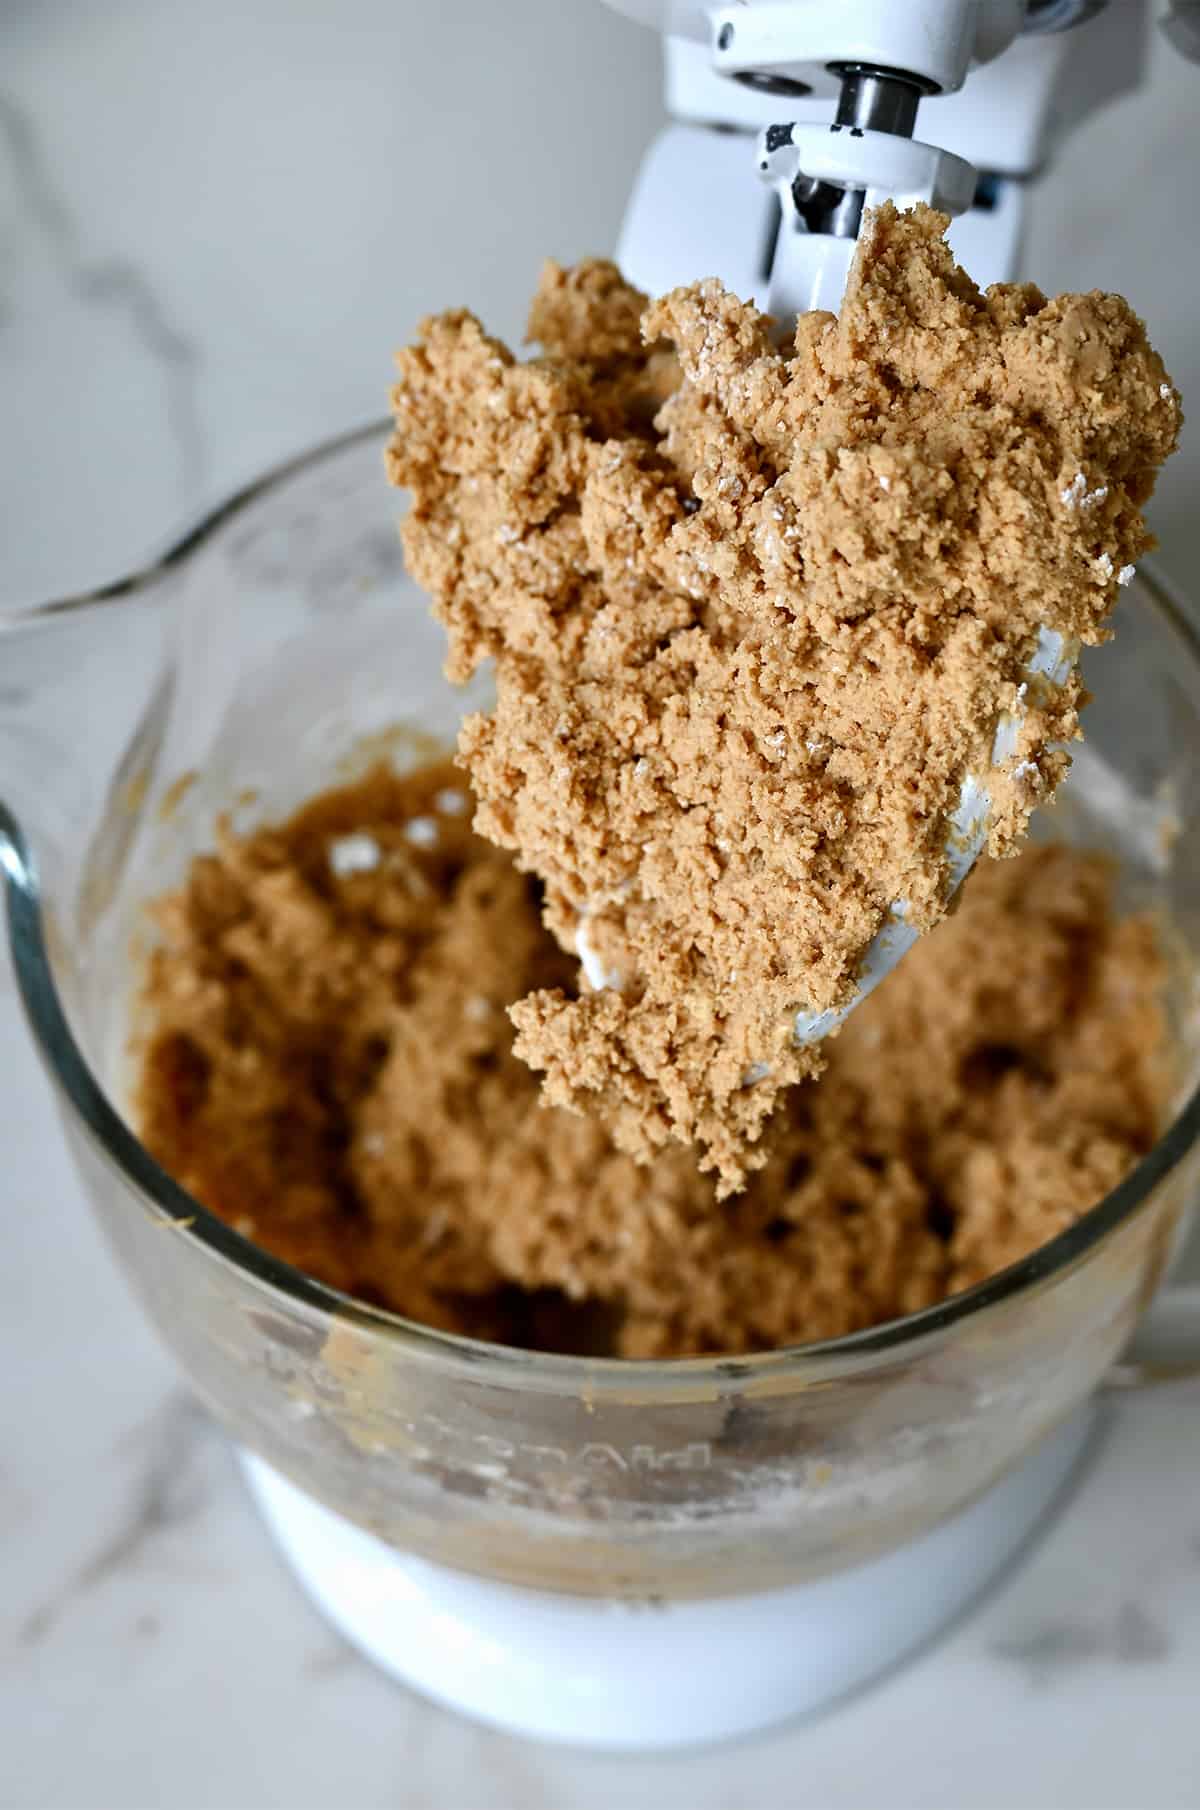 A peanut butter and graham cracker crumb mixture covering the paddle attachment of a stand mixer.